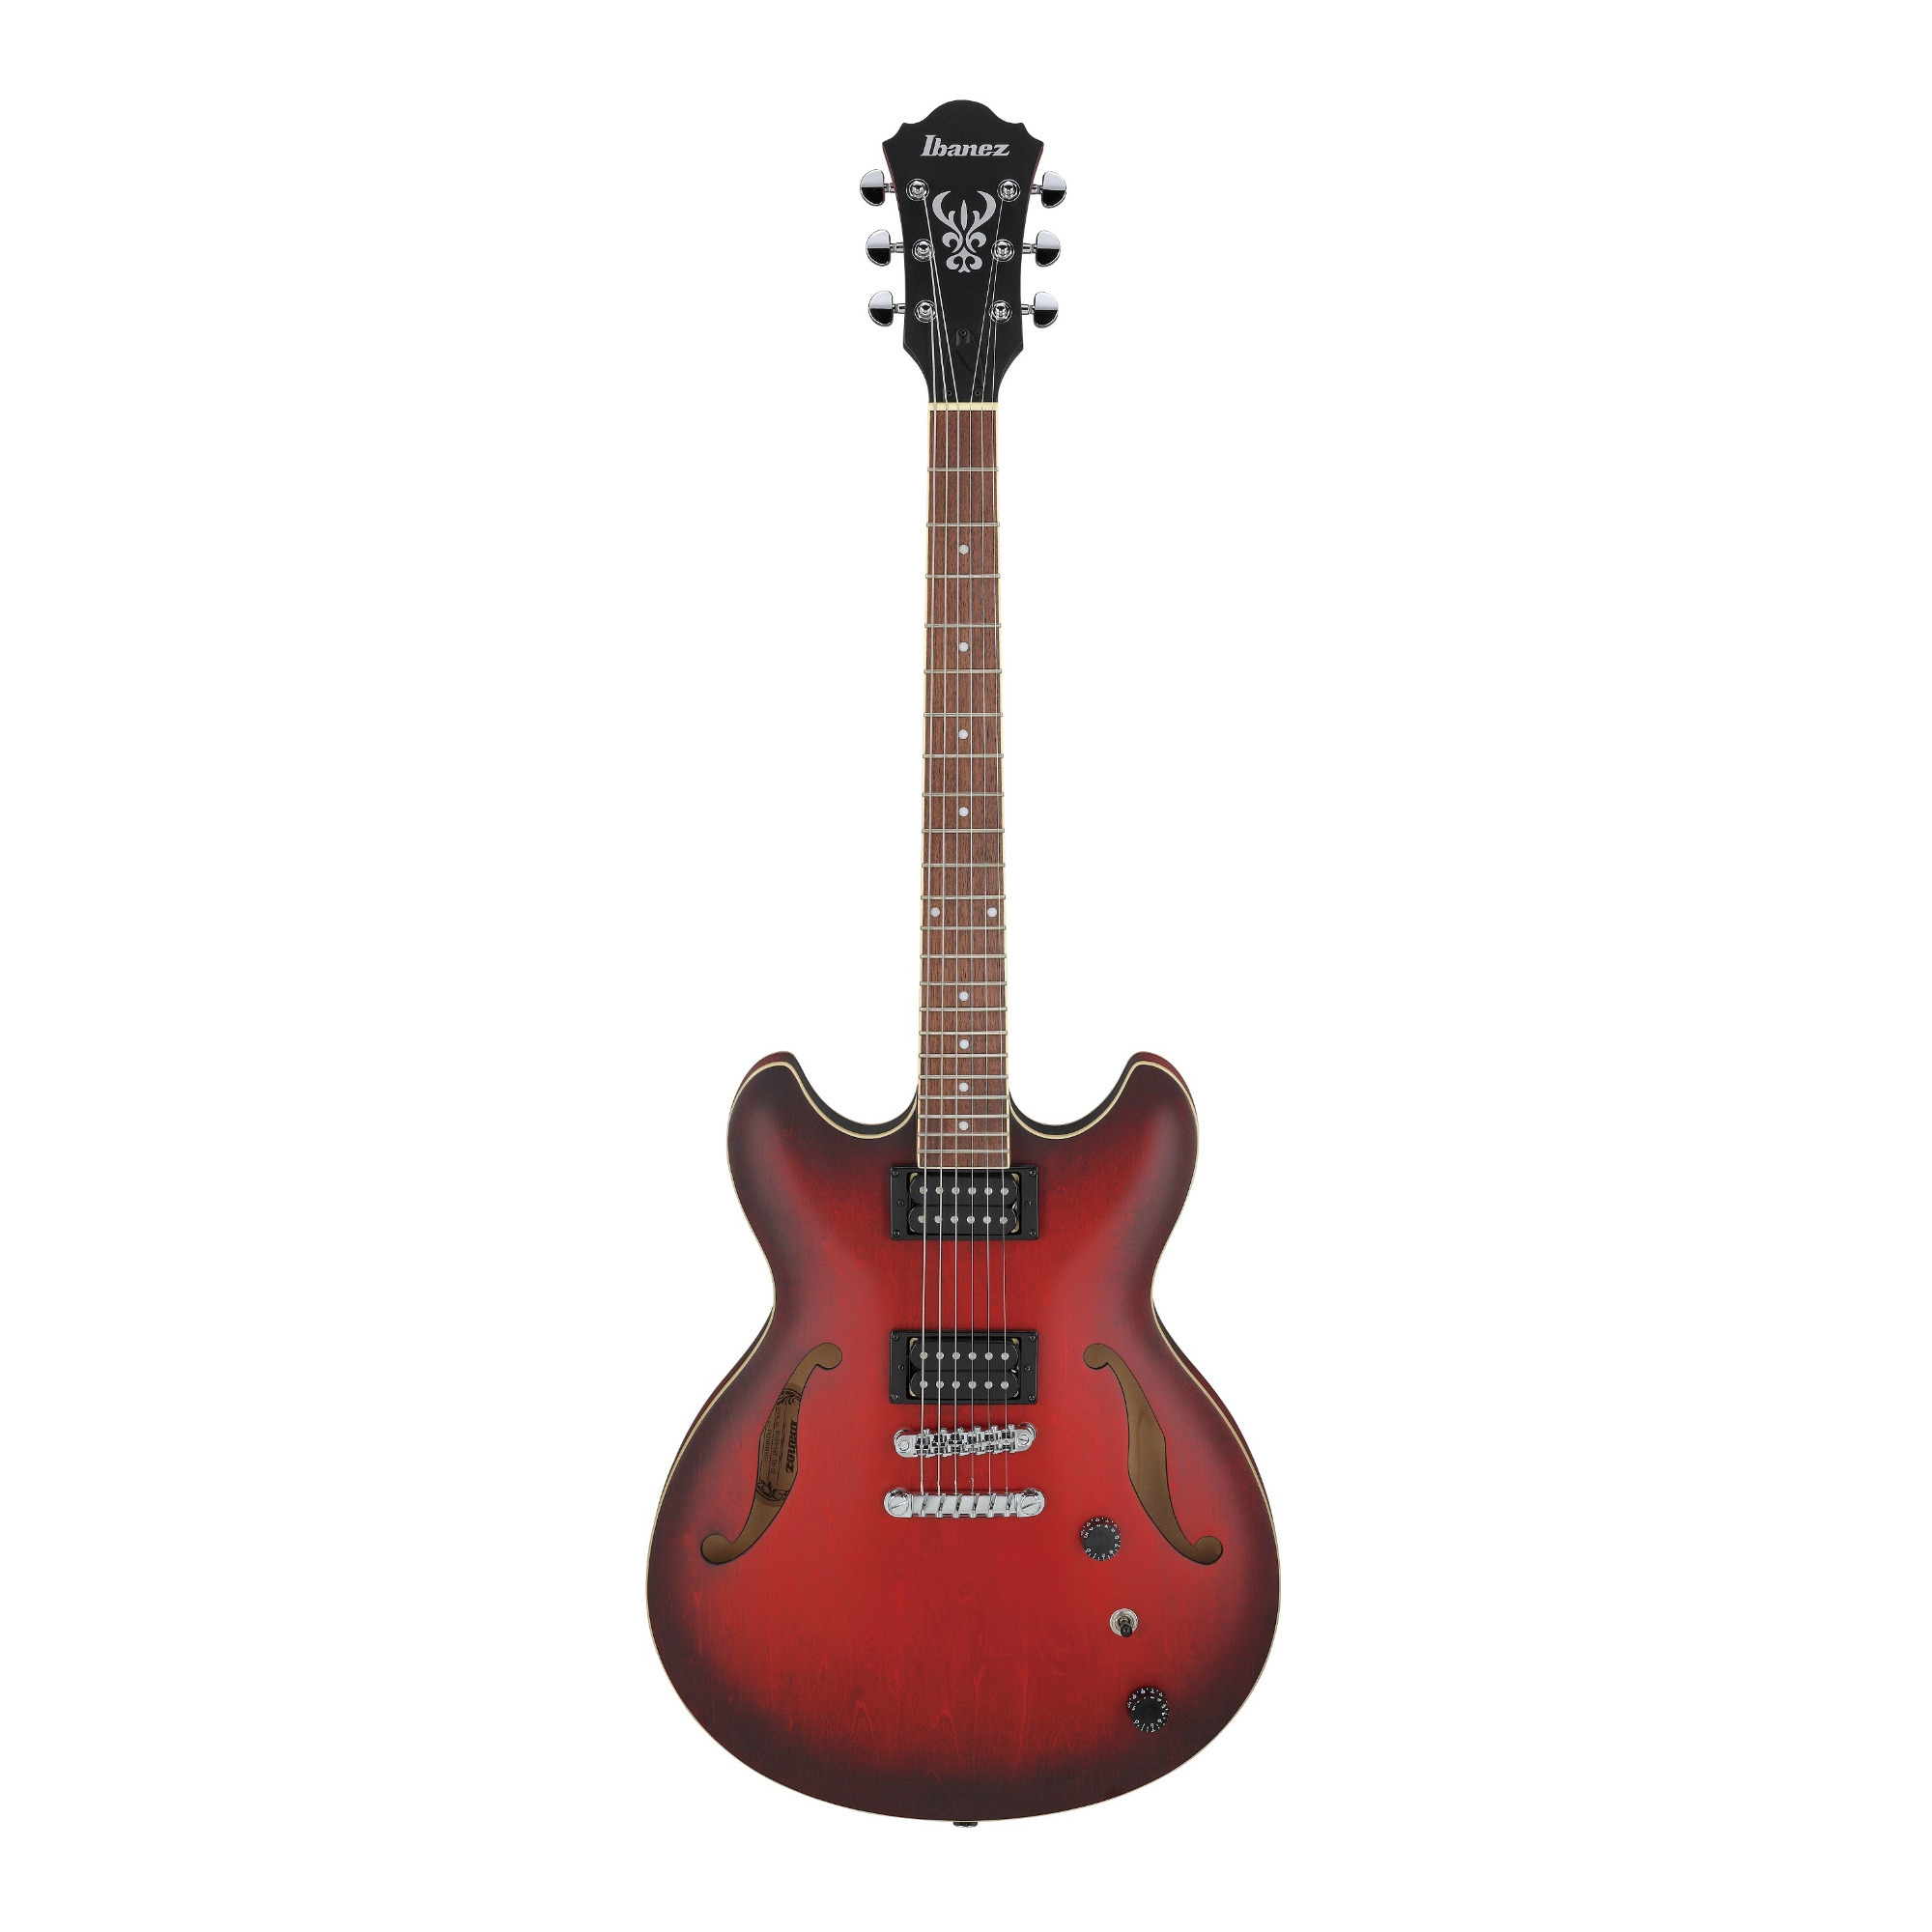 AS Series Standard 6-String Hollow Body Electric Guitar in Sunburst Red Flat - Ibanez AS53SRF